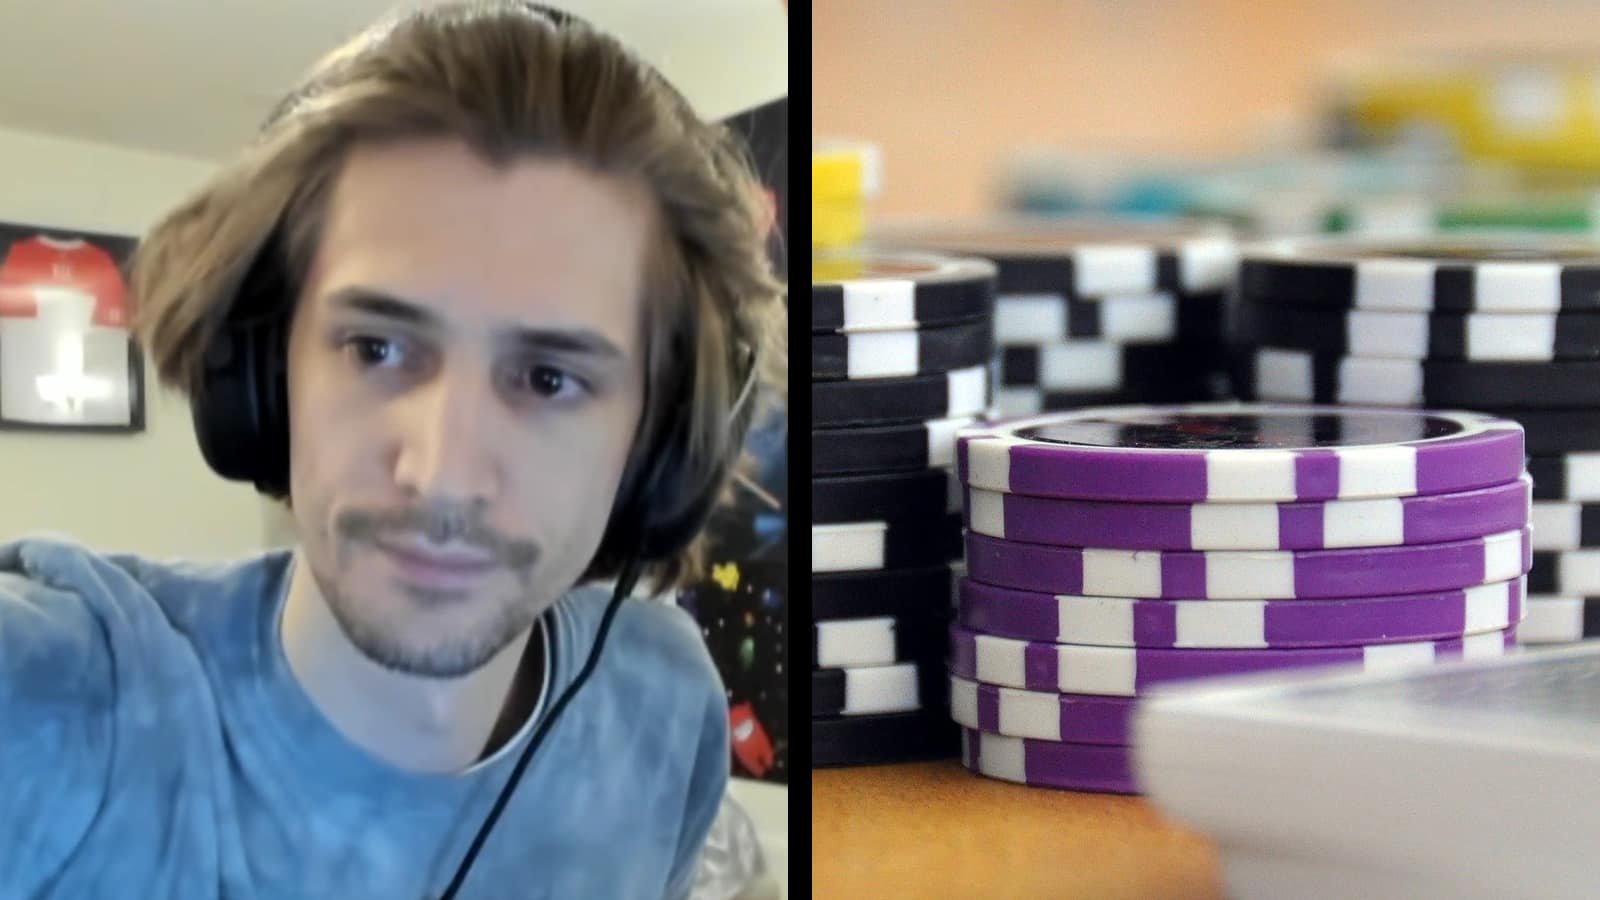 xQc streaming on the left, with a separate image of poker chips on the right.